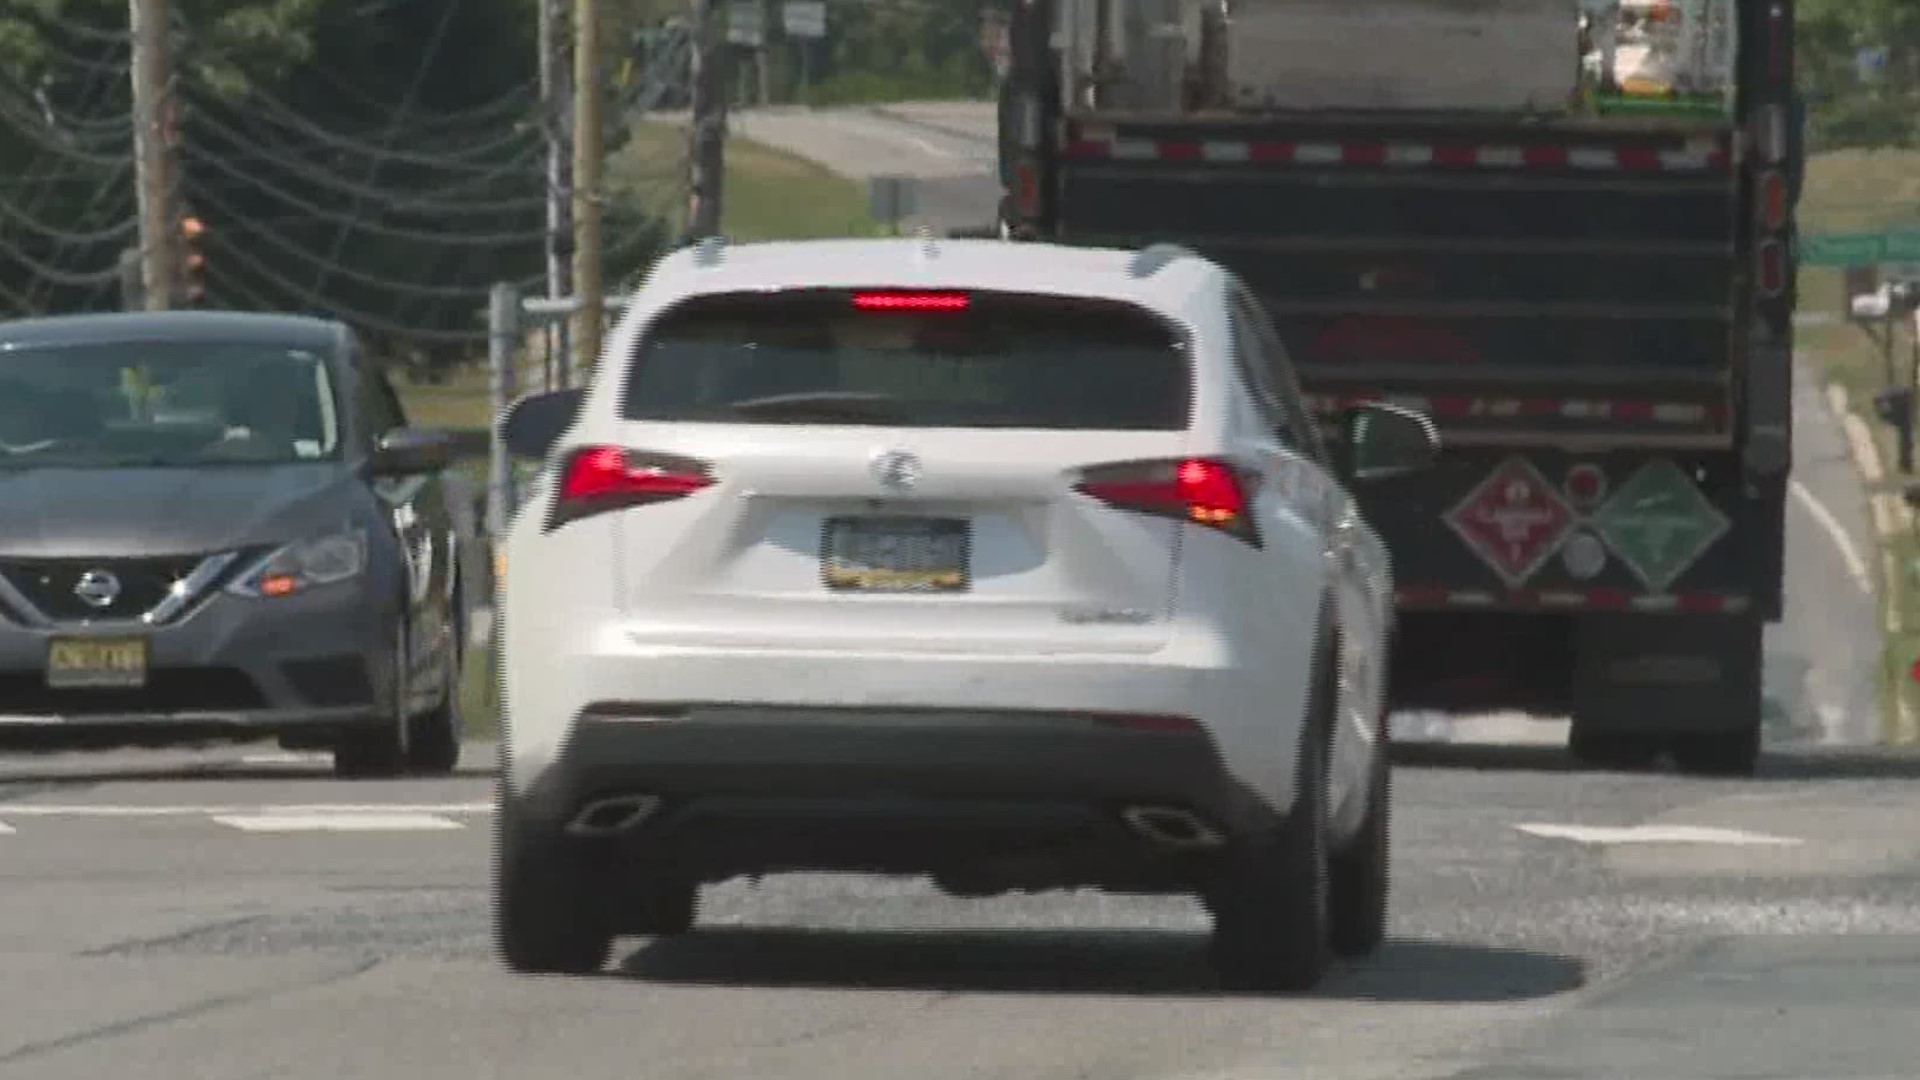 PennDOT and other officials are sounding the alarm as they continues to see an increase in risky driving behaviors during the COVID-19 pandemic.